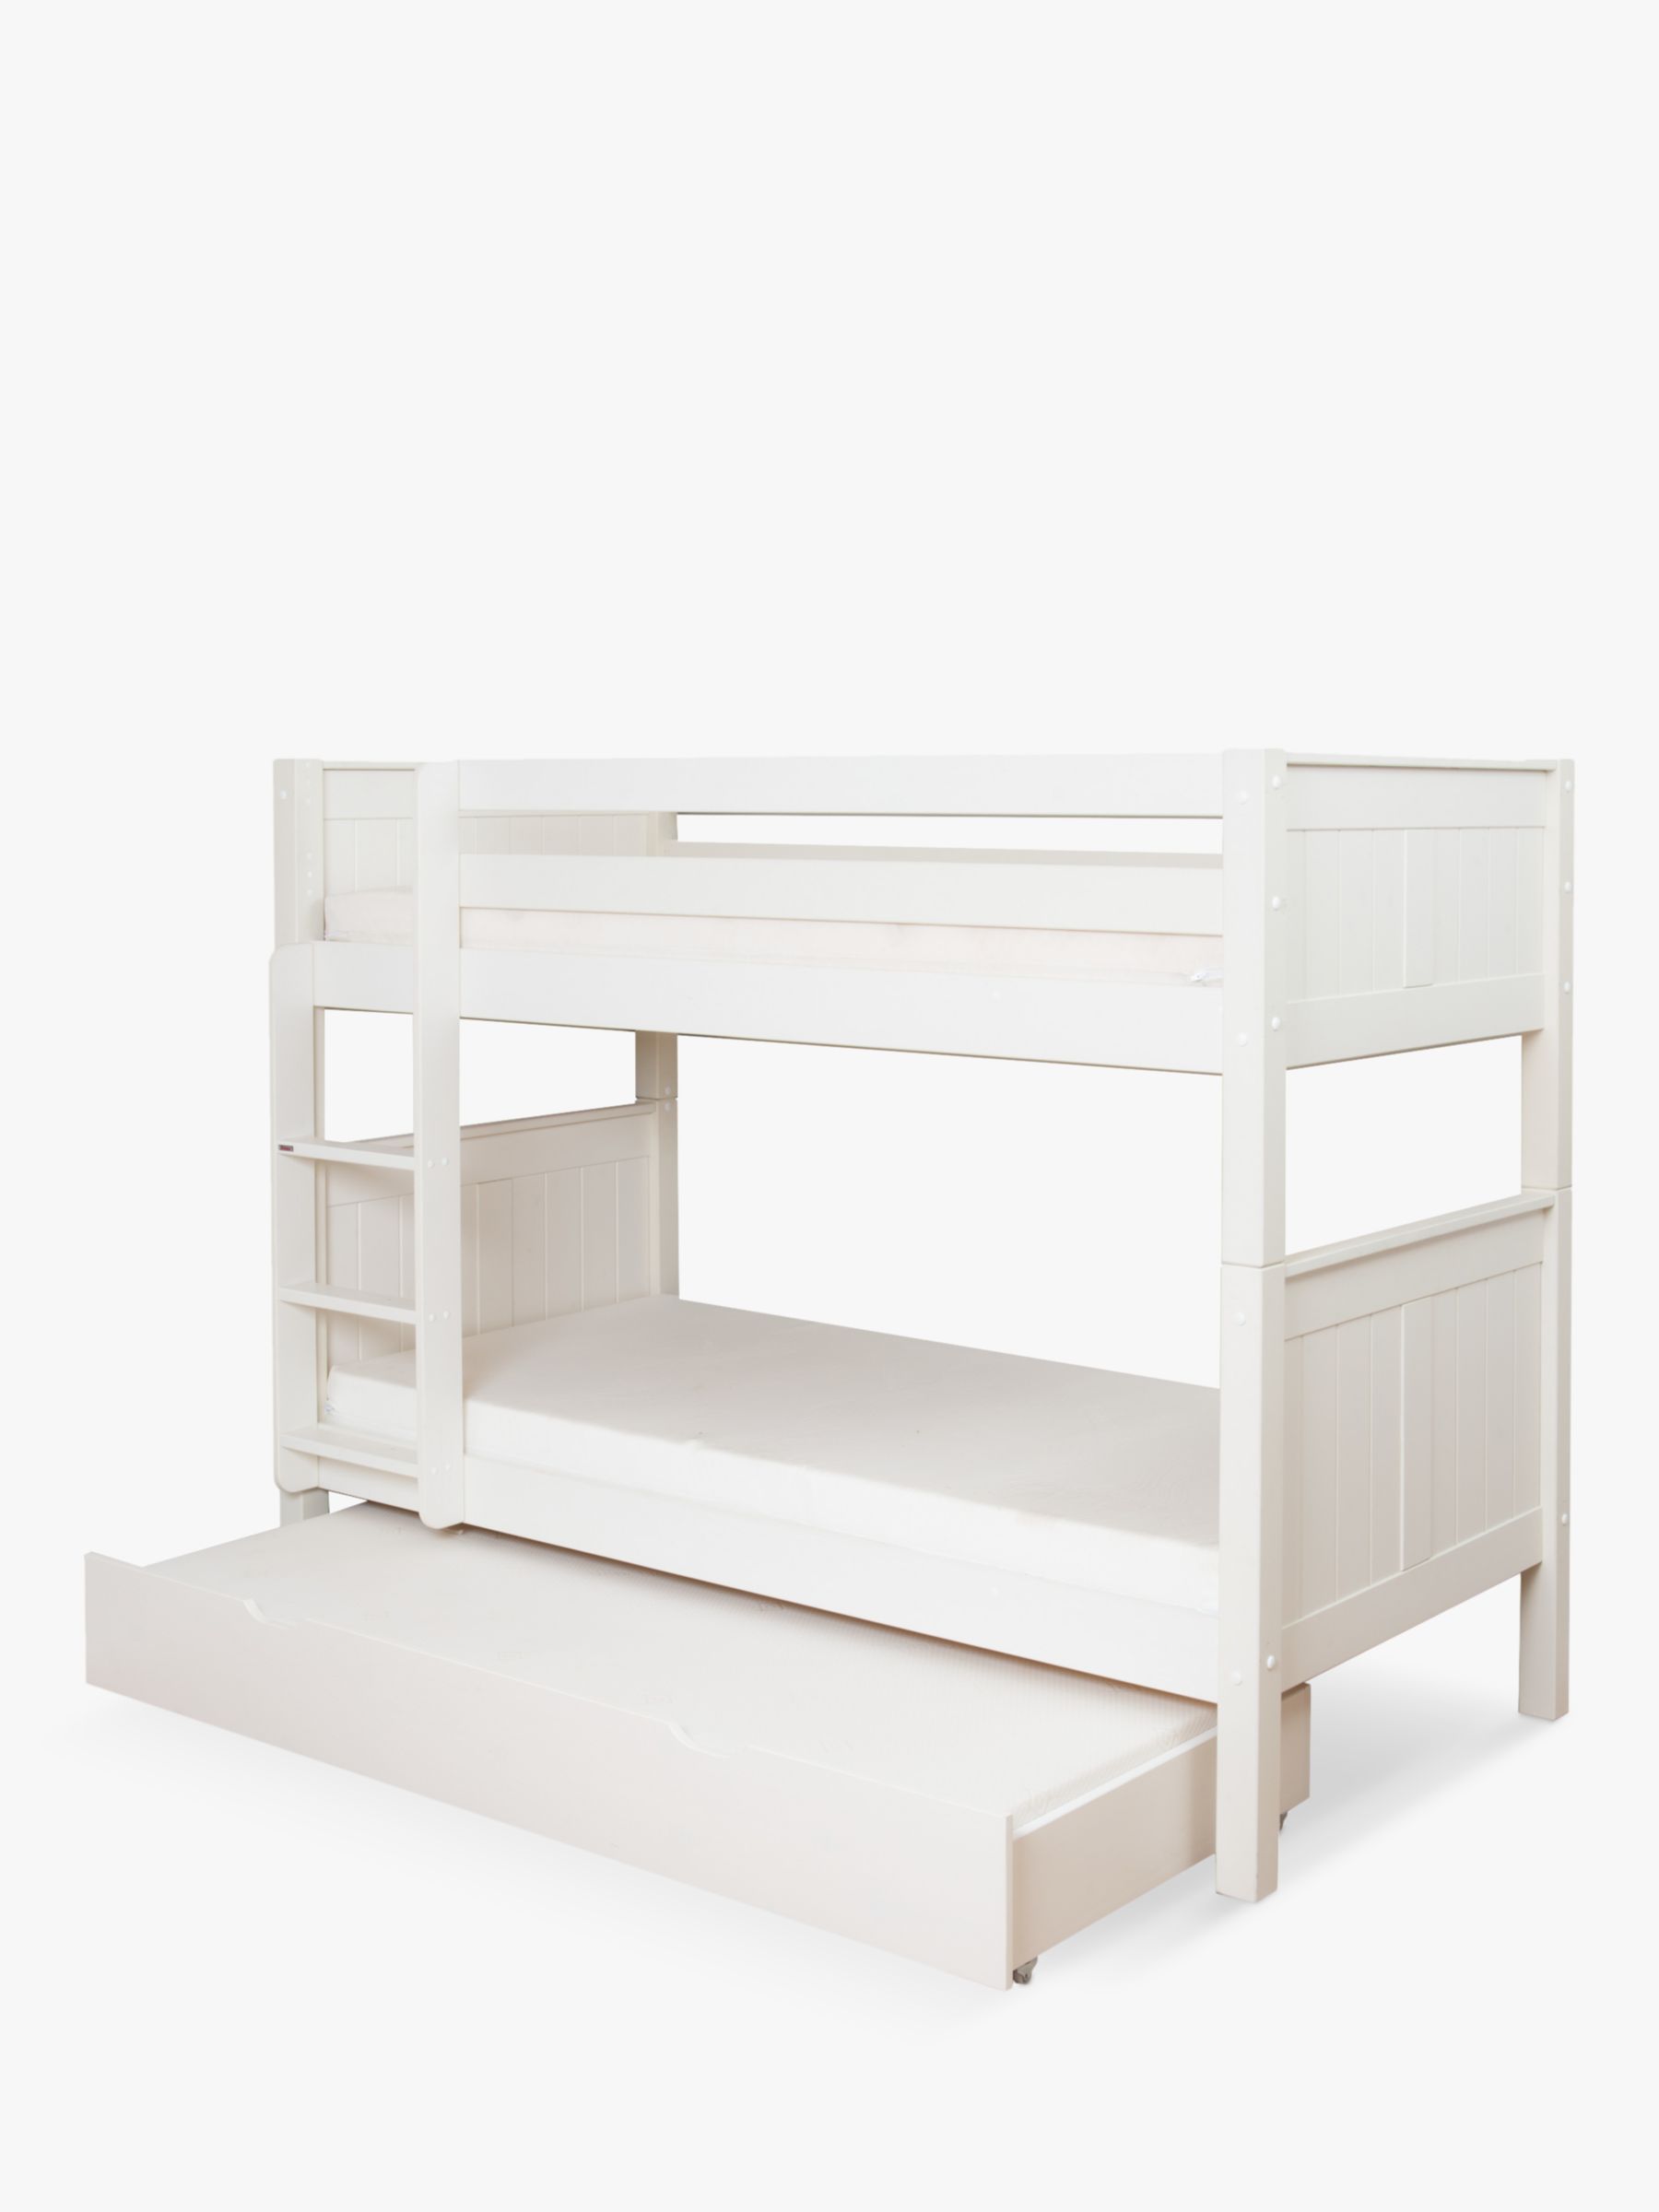 Children S Bunk Beds John Lewis, Childrens Bunk Beds With Pull Out Bed